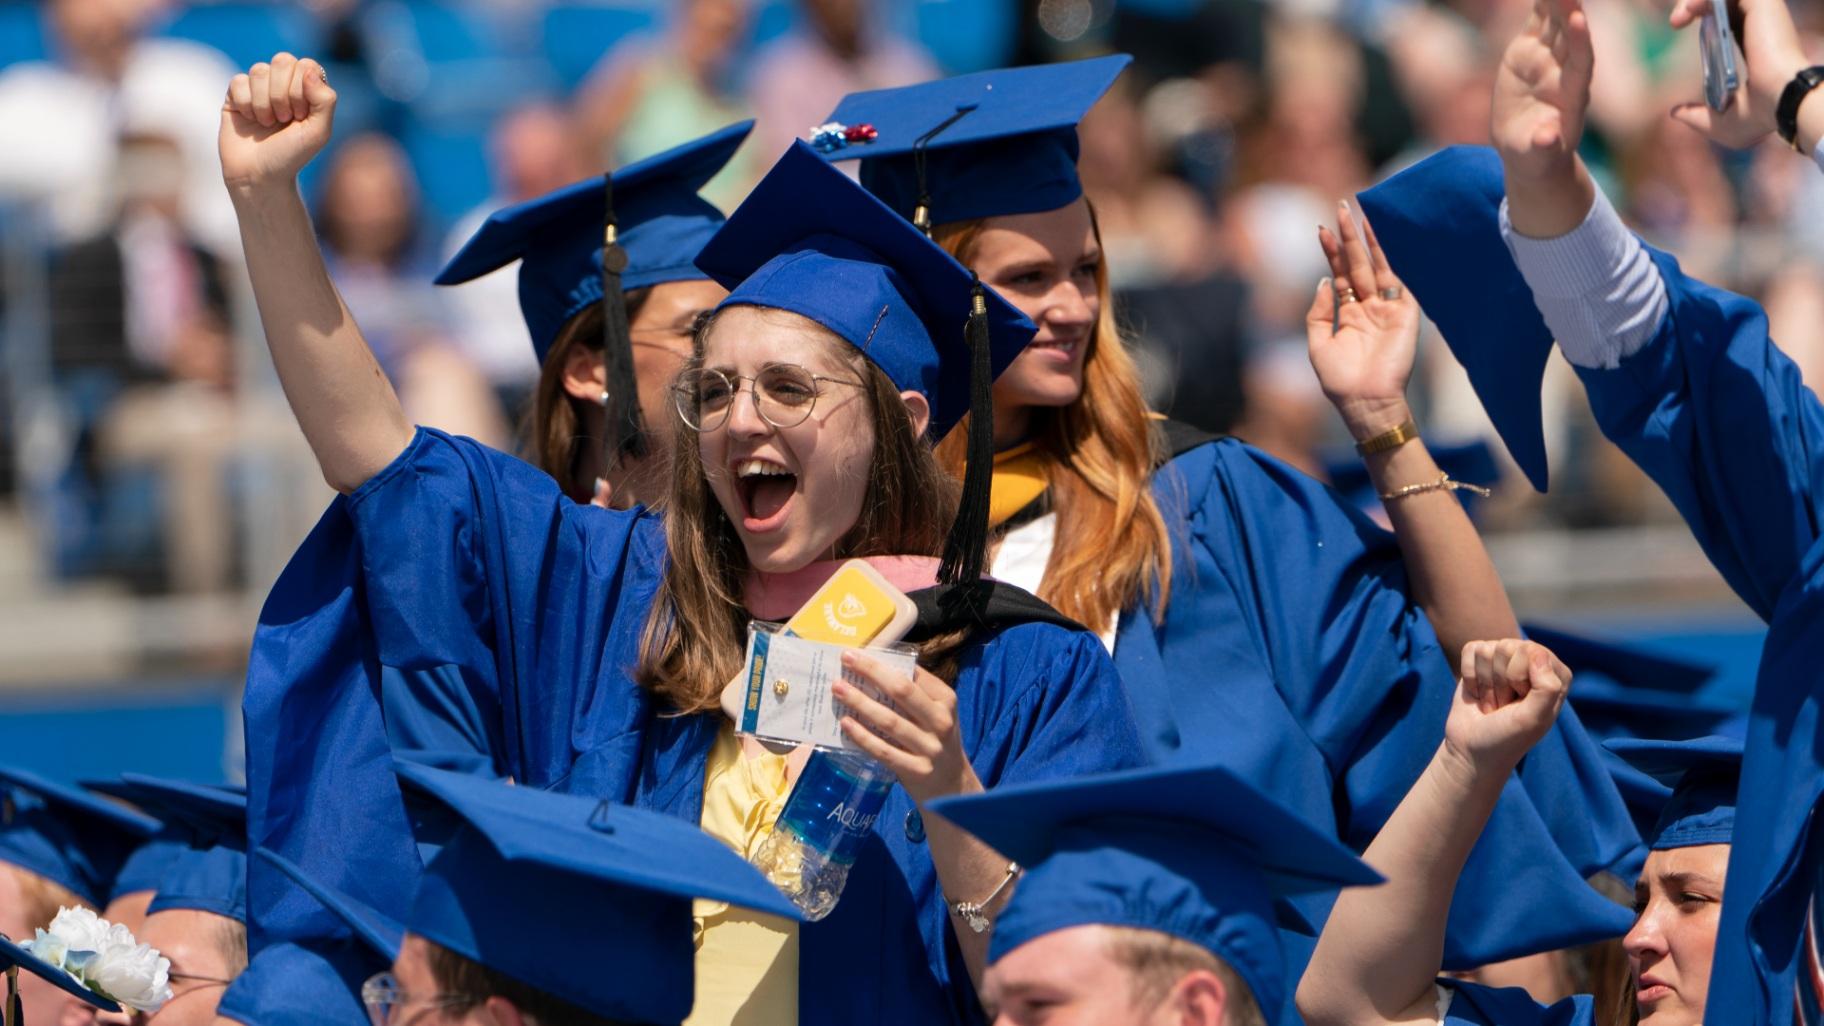 Graduates celebrate during the University of Delaware Class of 2022 commencement ceremony in Newark, Del., on Saturday, May 28, 2022. (AP Photo/Manuel Balce Ceneta)